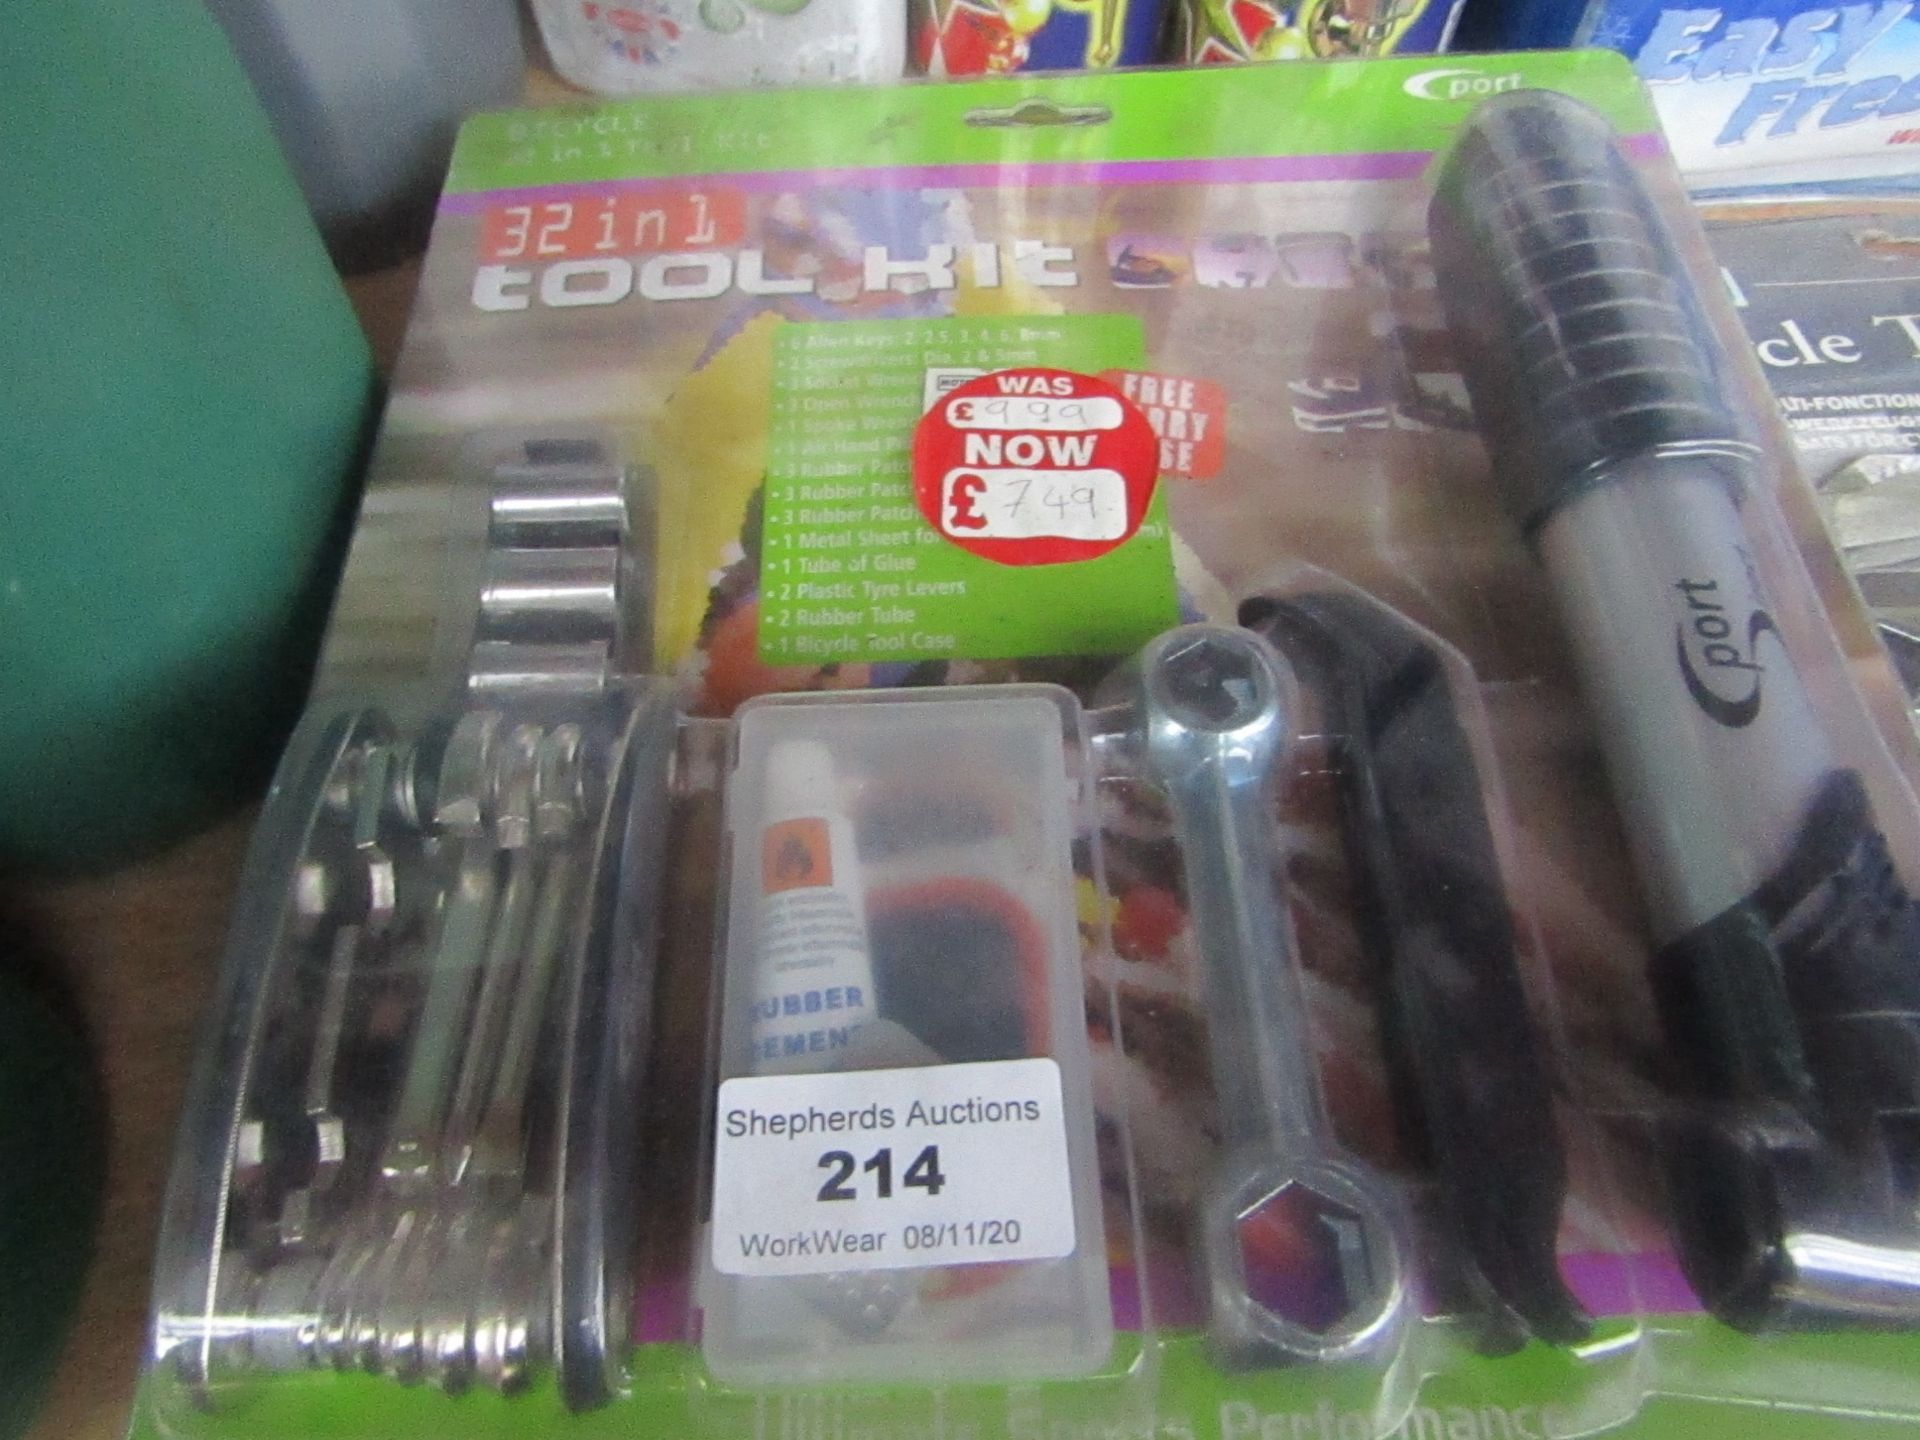 SportDirect - 32 in 1 Bicycle Tool Kit - Packaged.